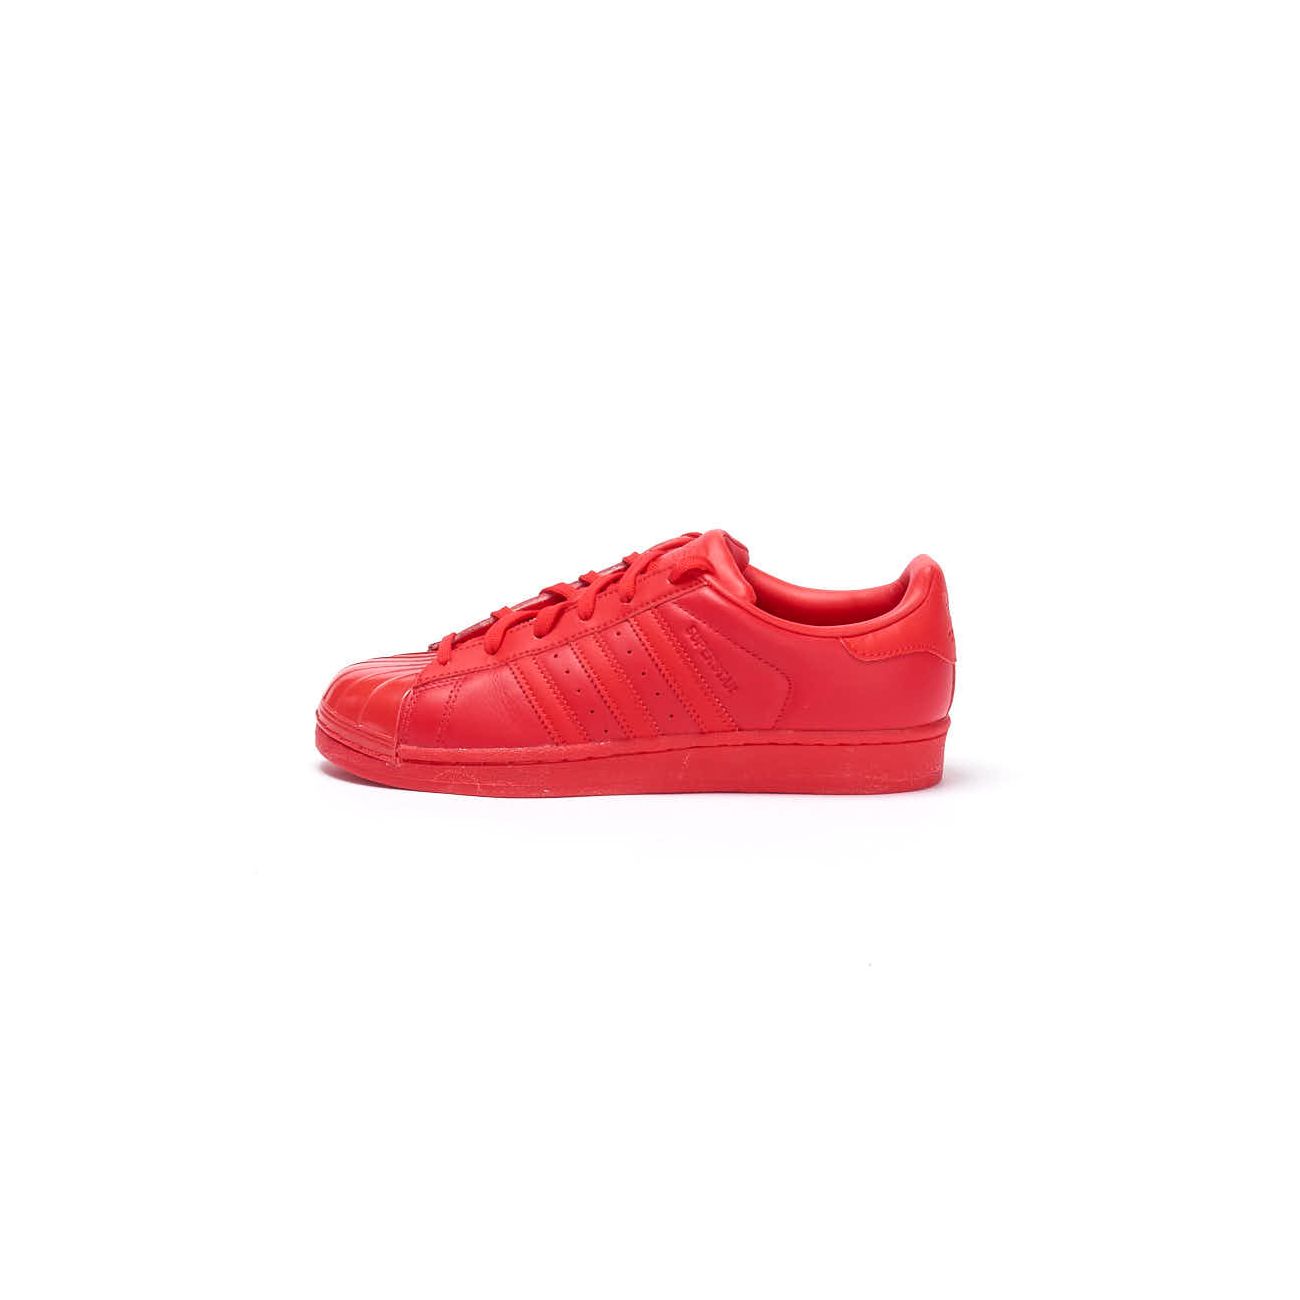 leftovers salesman helicopter ADIDAS SNEAKER SUPERSTAR GLOSSY TOE Woman Ray red | Mascheroni Sportswear